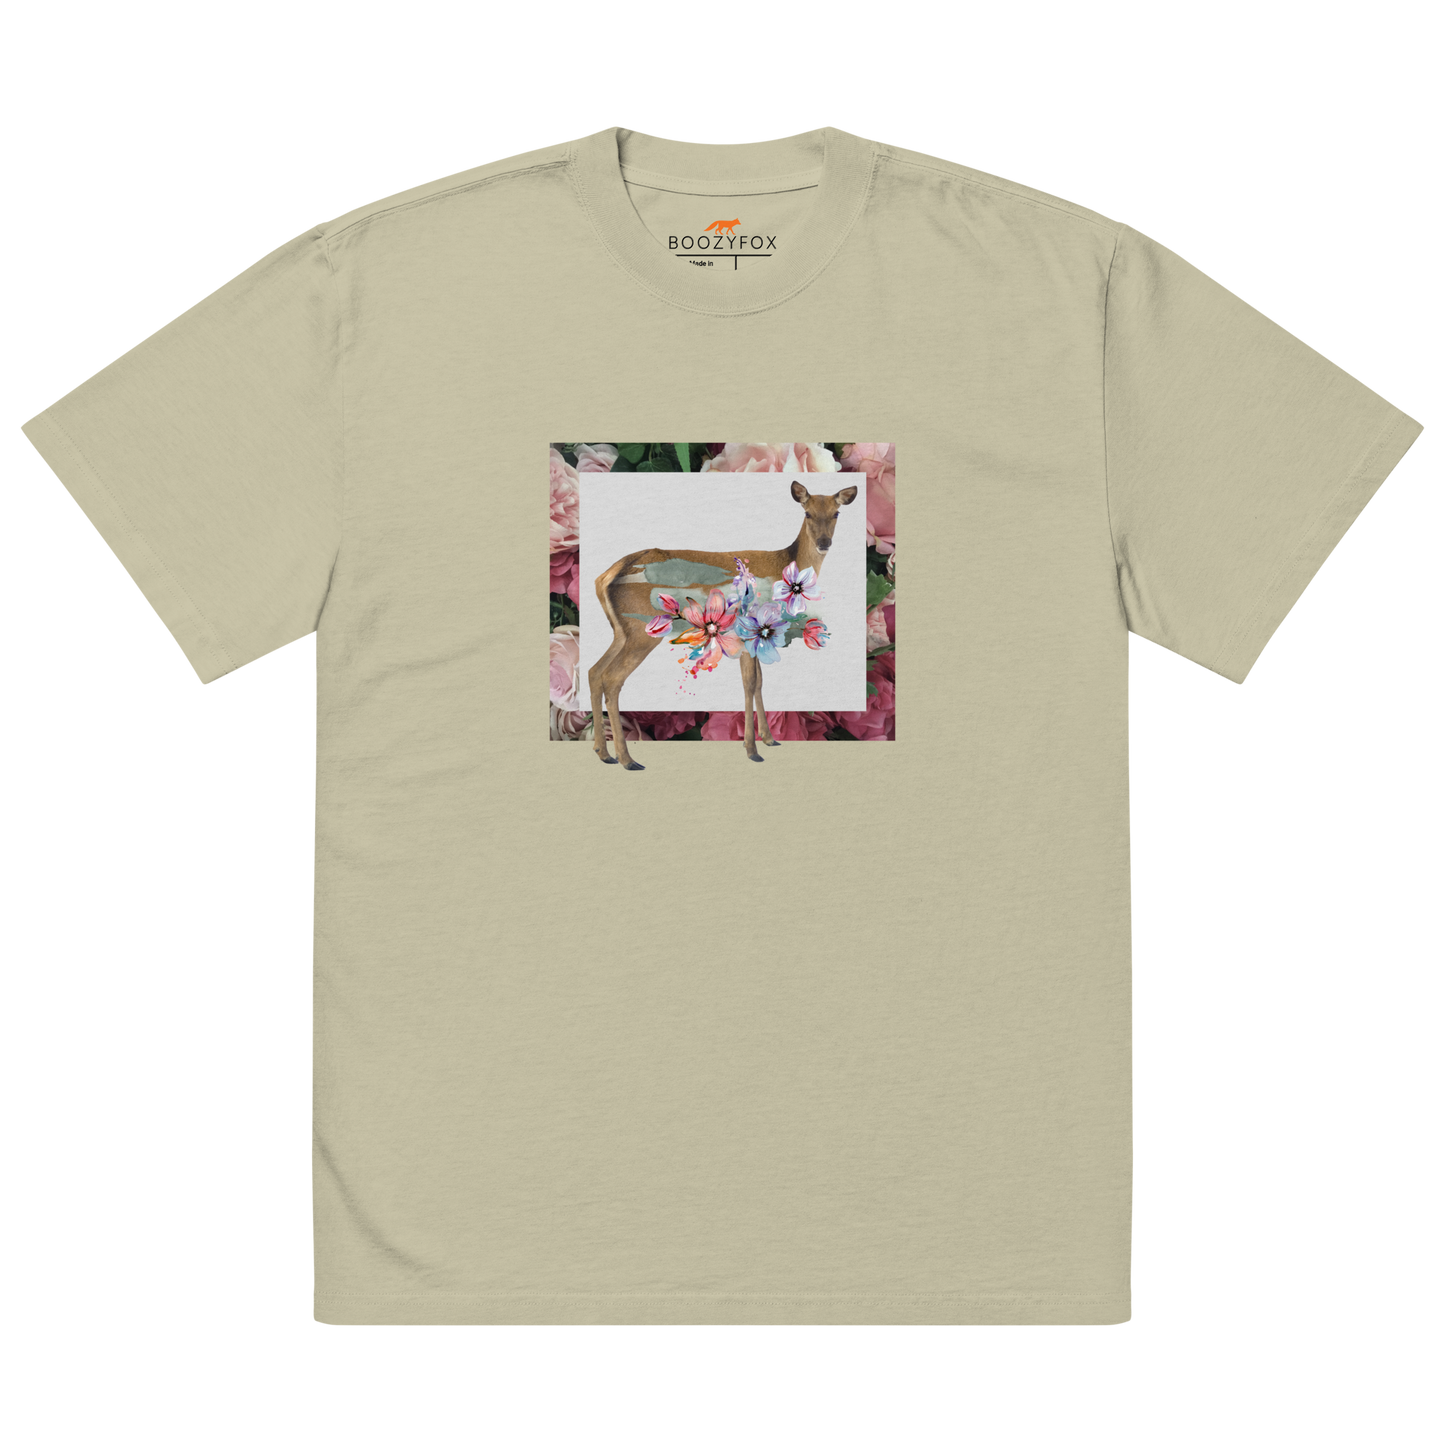 Faded Eucalyptus Deer Oversized T-Shirt featuring a captivating Floral Deer graphic on the chest - Cute Graphic Deer Oversized Tees - Boozy Fox